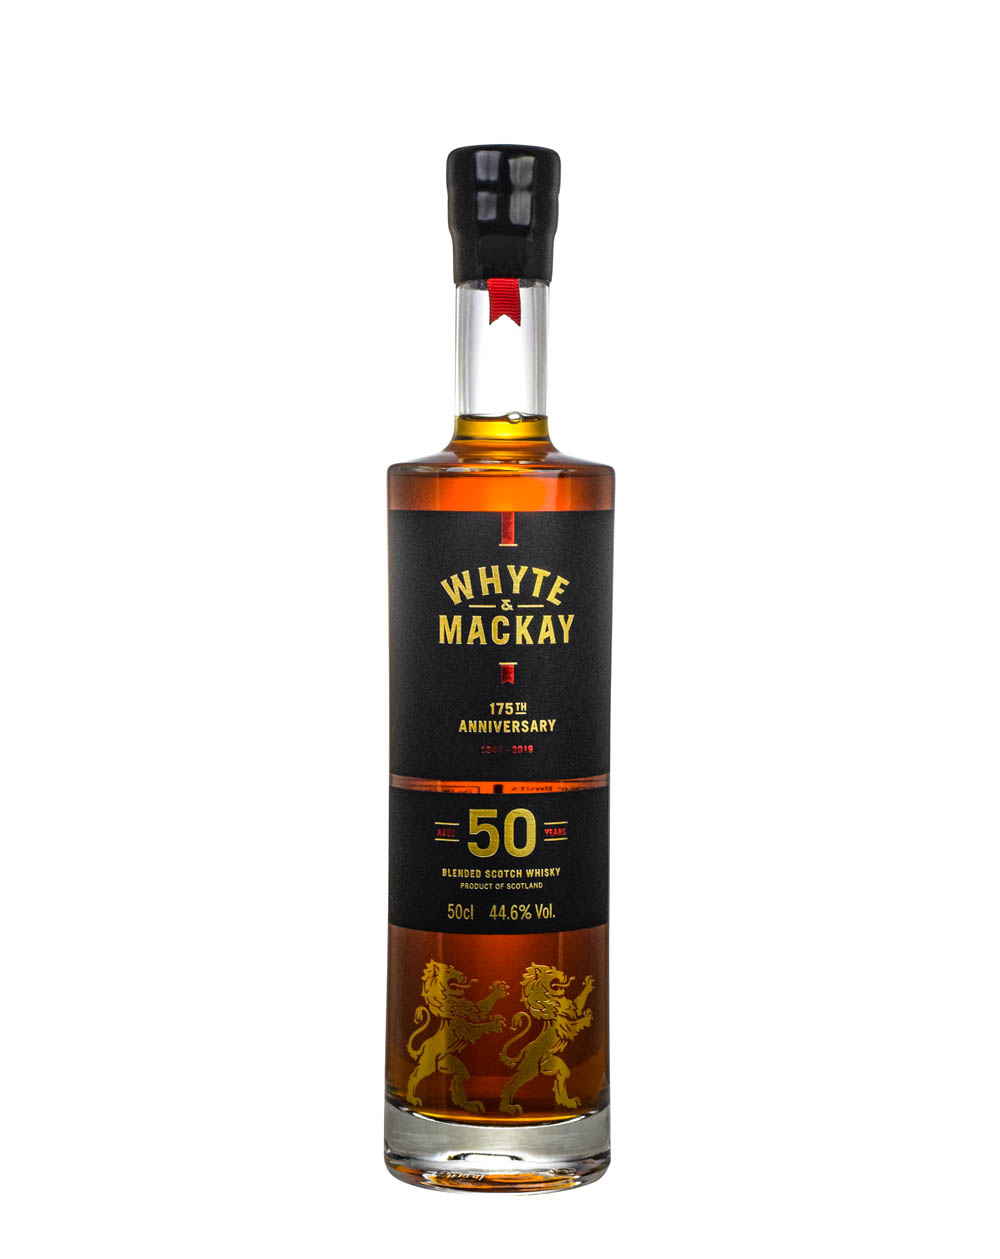 Whyte & Mackay 50 Years Old 175th Anniversary Blended Scotch Whisky